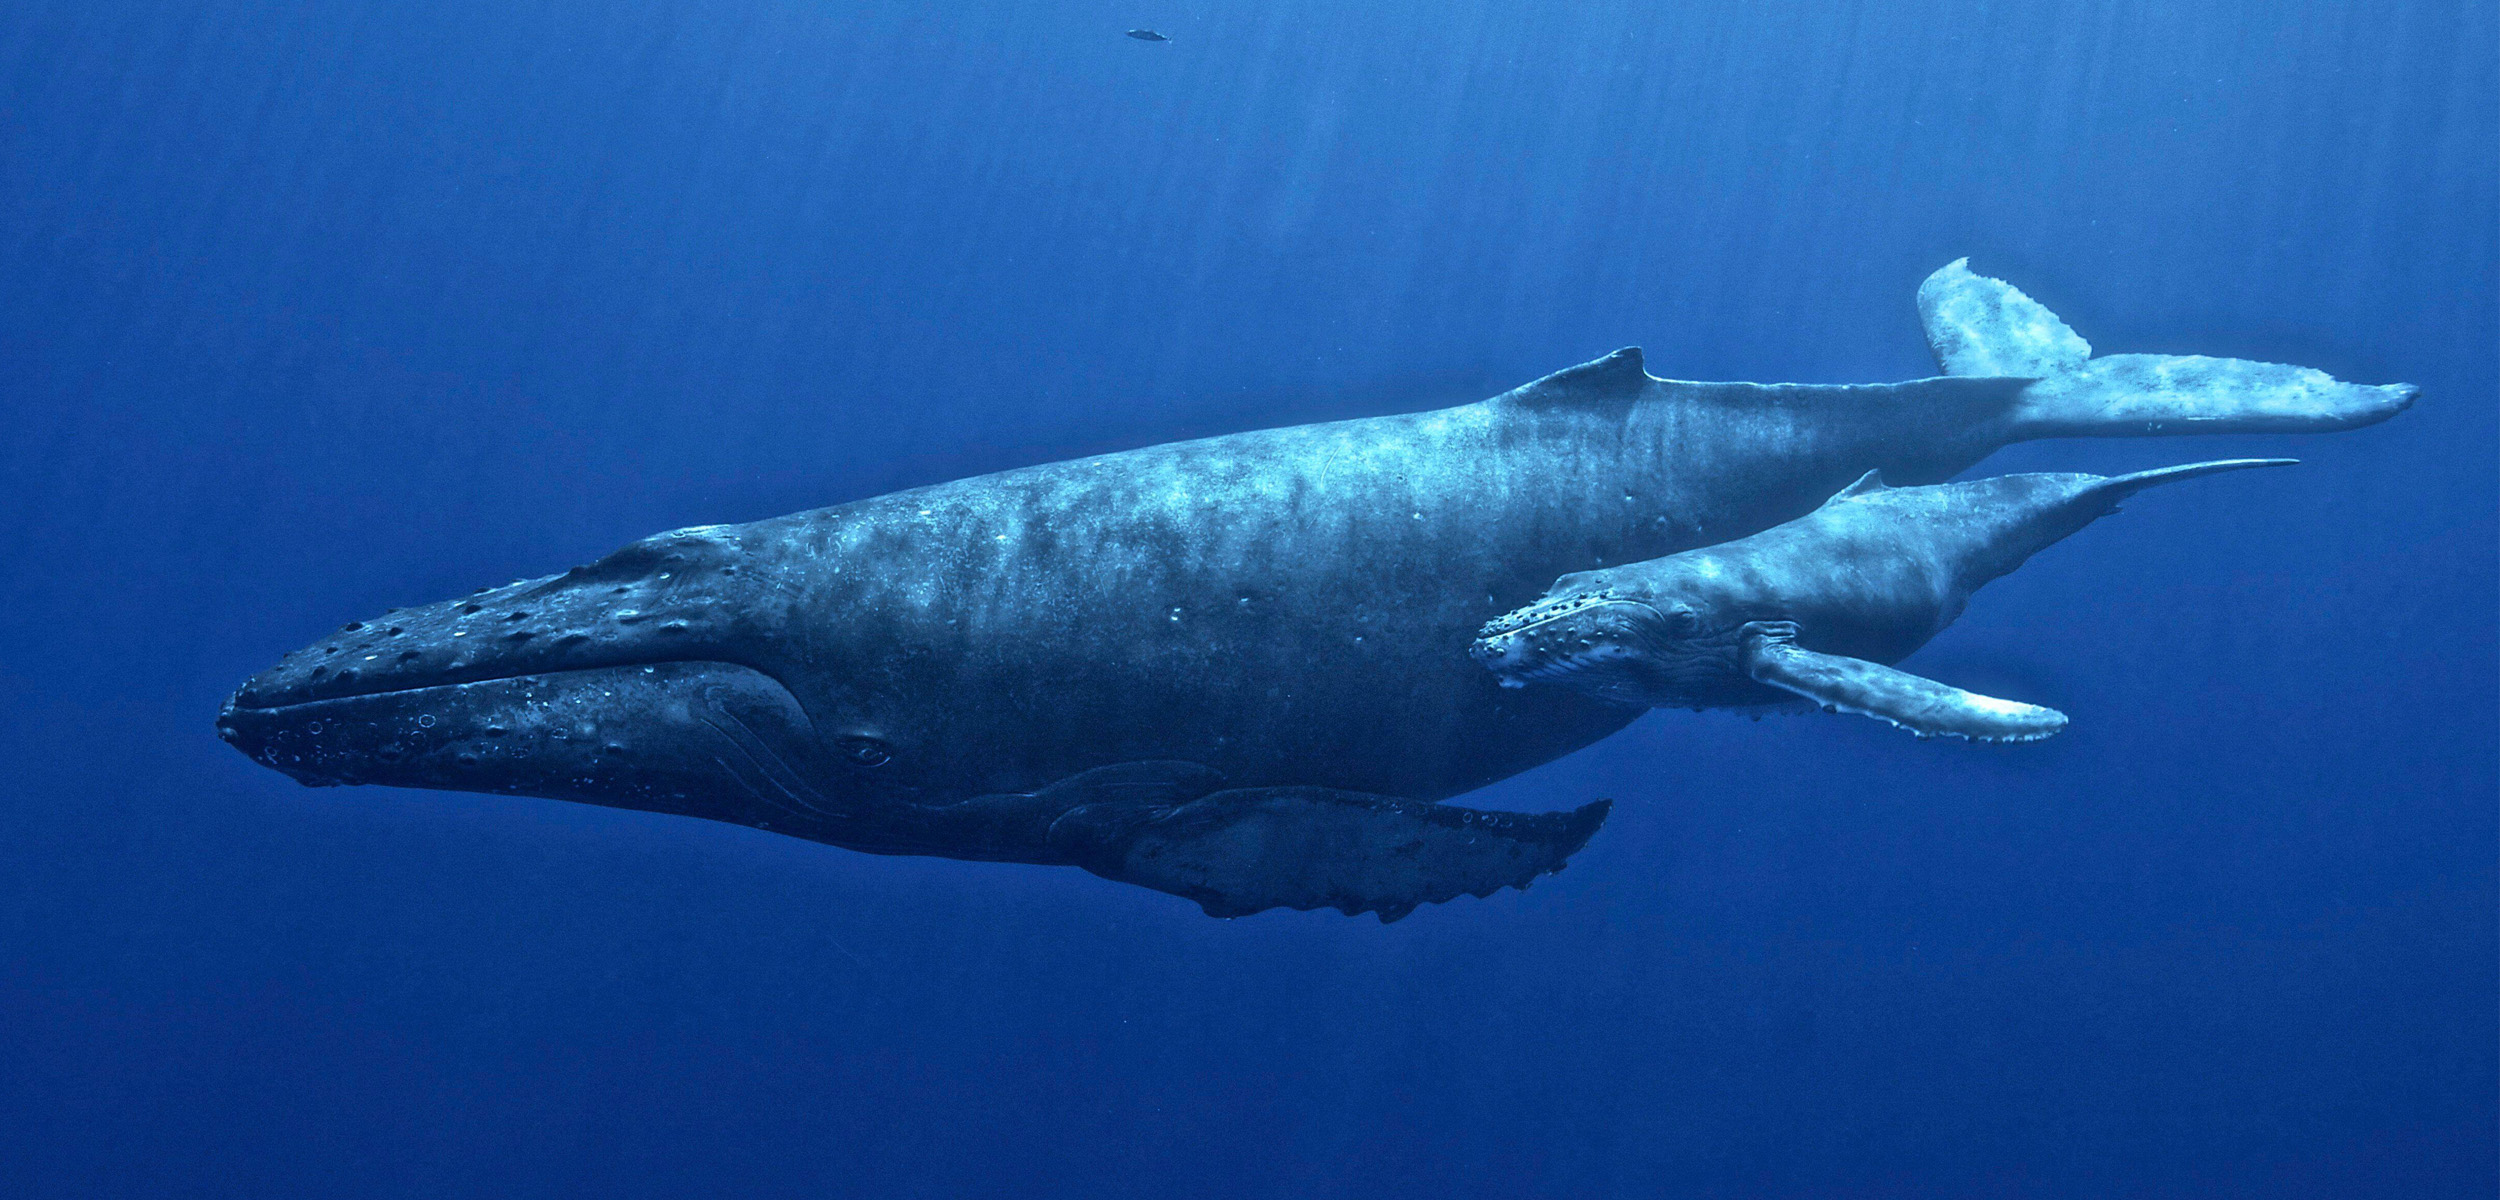 A large whale is flanked by a smaller calf set against a deep blue background with the sun streaming in from the sky above the water